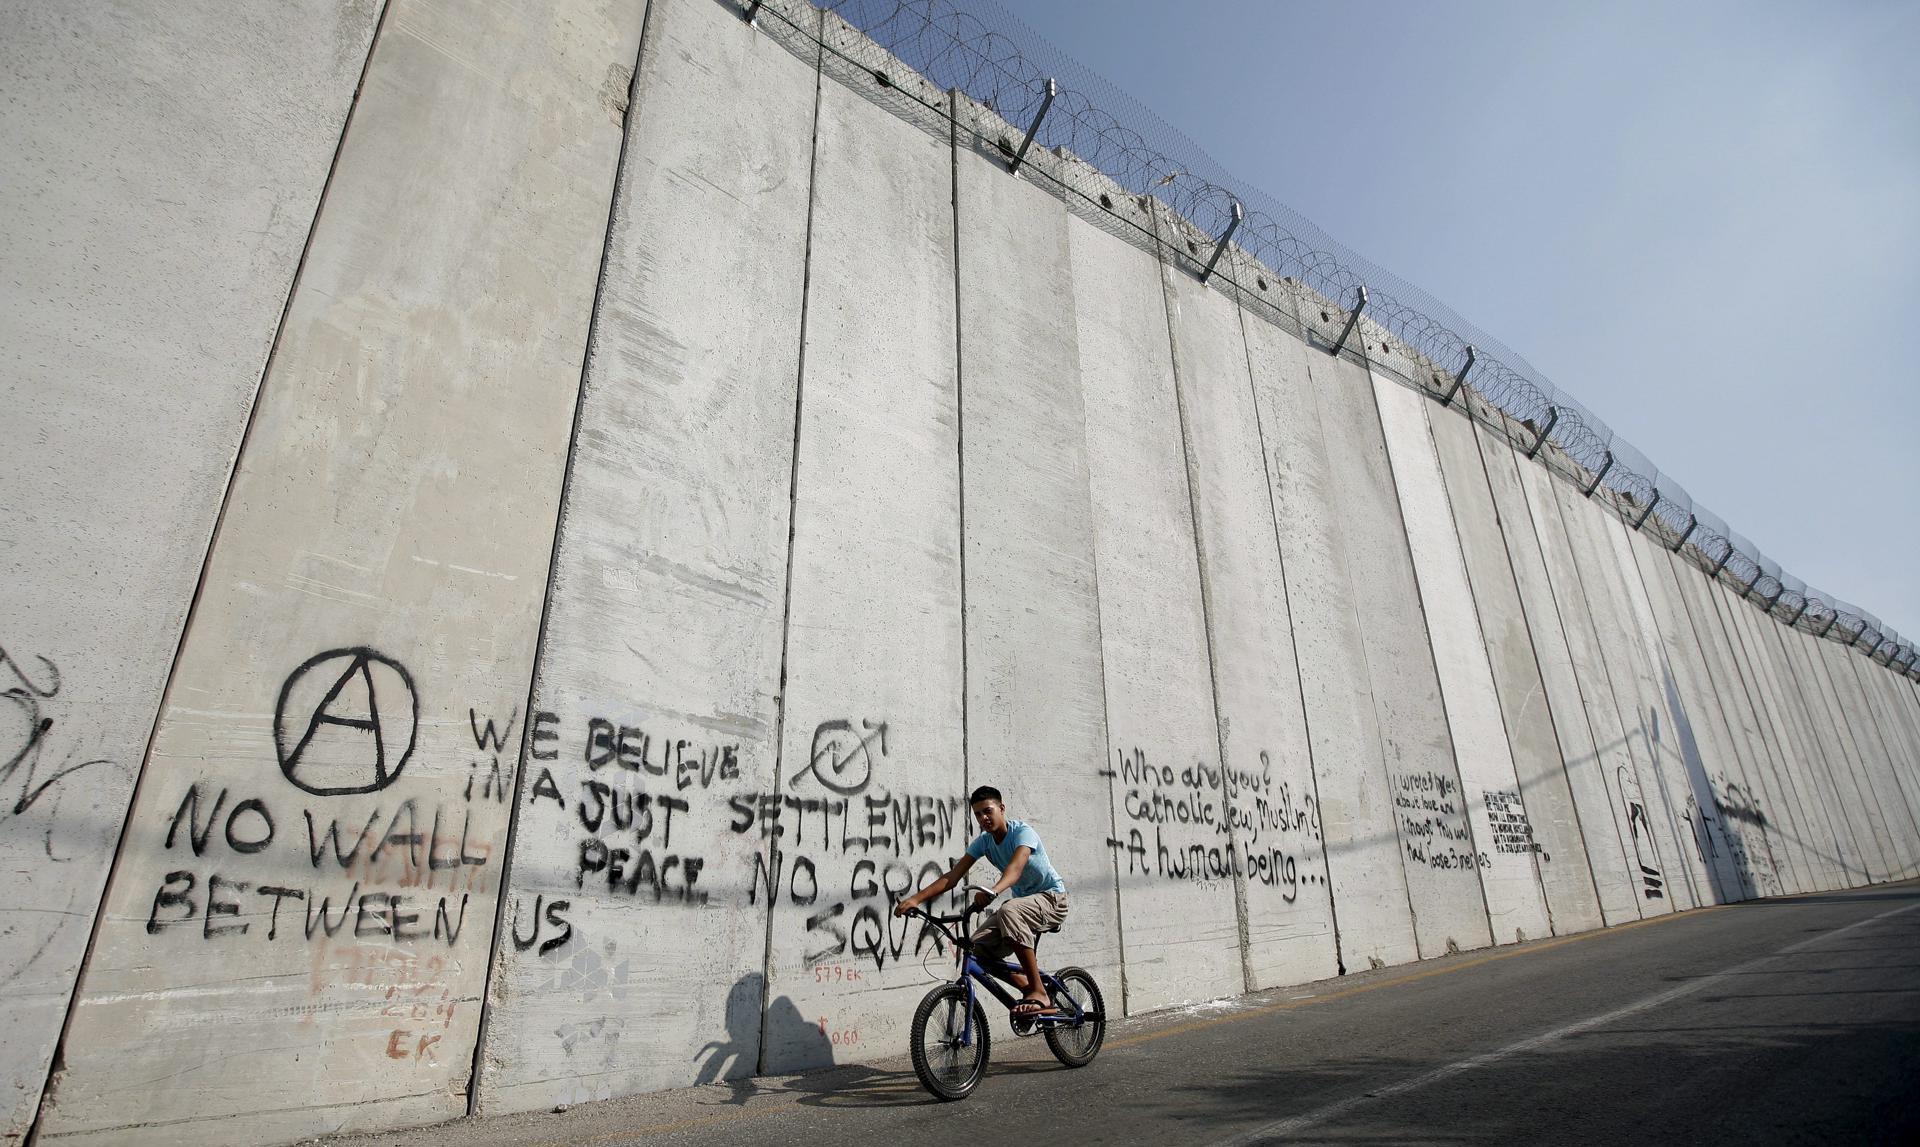 An Arab boy rides his bike next to the separation wall between the Israel and Palestine in east Jerusalem, on 23 August 2010. EPA/OLIVER WEIKEN/FILE